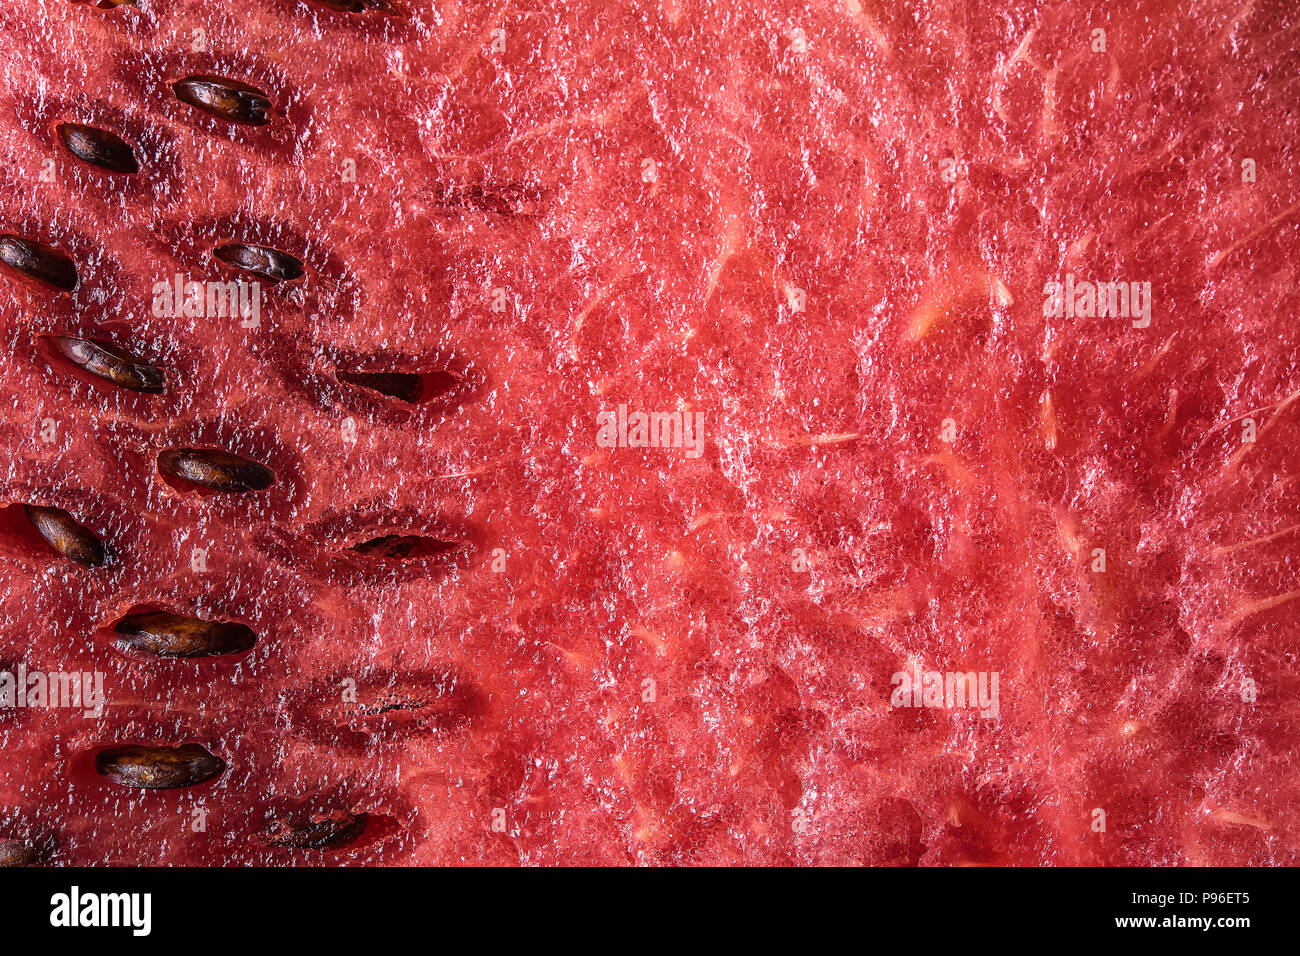 Macro of freshly cutted ripe red watermelon with seeds. Healthy eating and summer atmosphere concept. Highly detailed background with copy space. Stock Photo